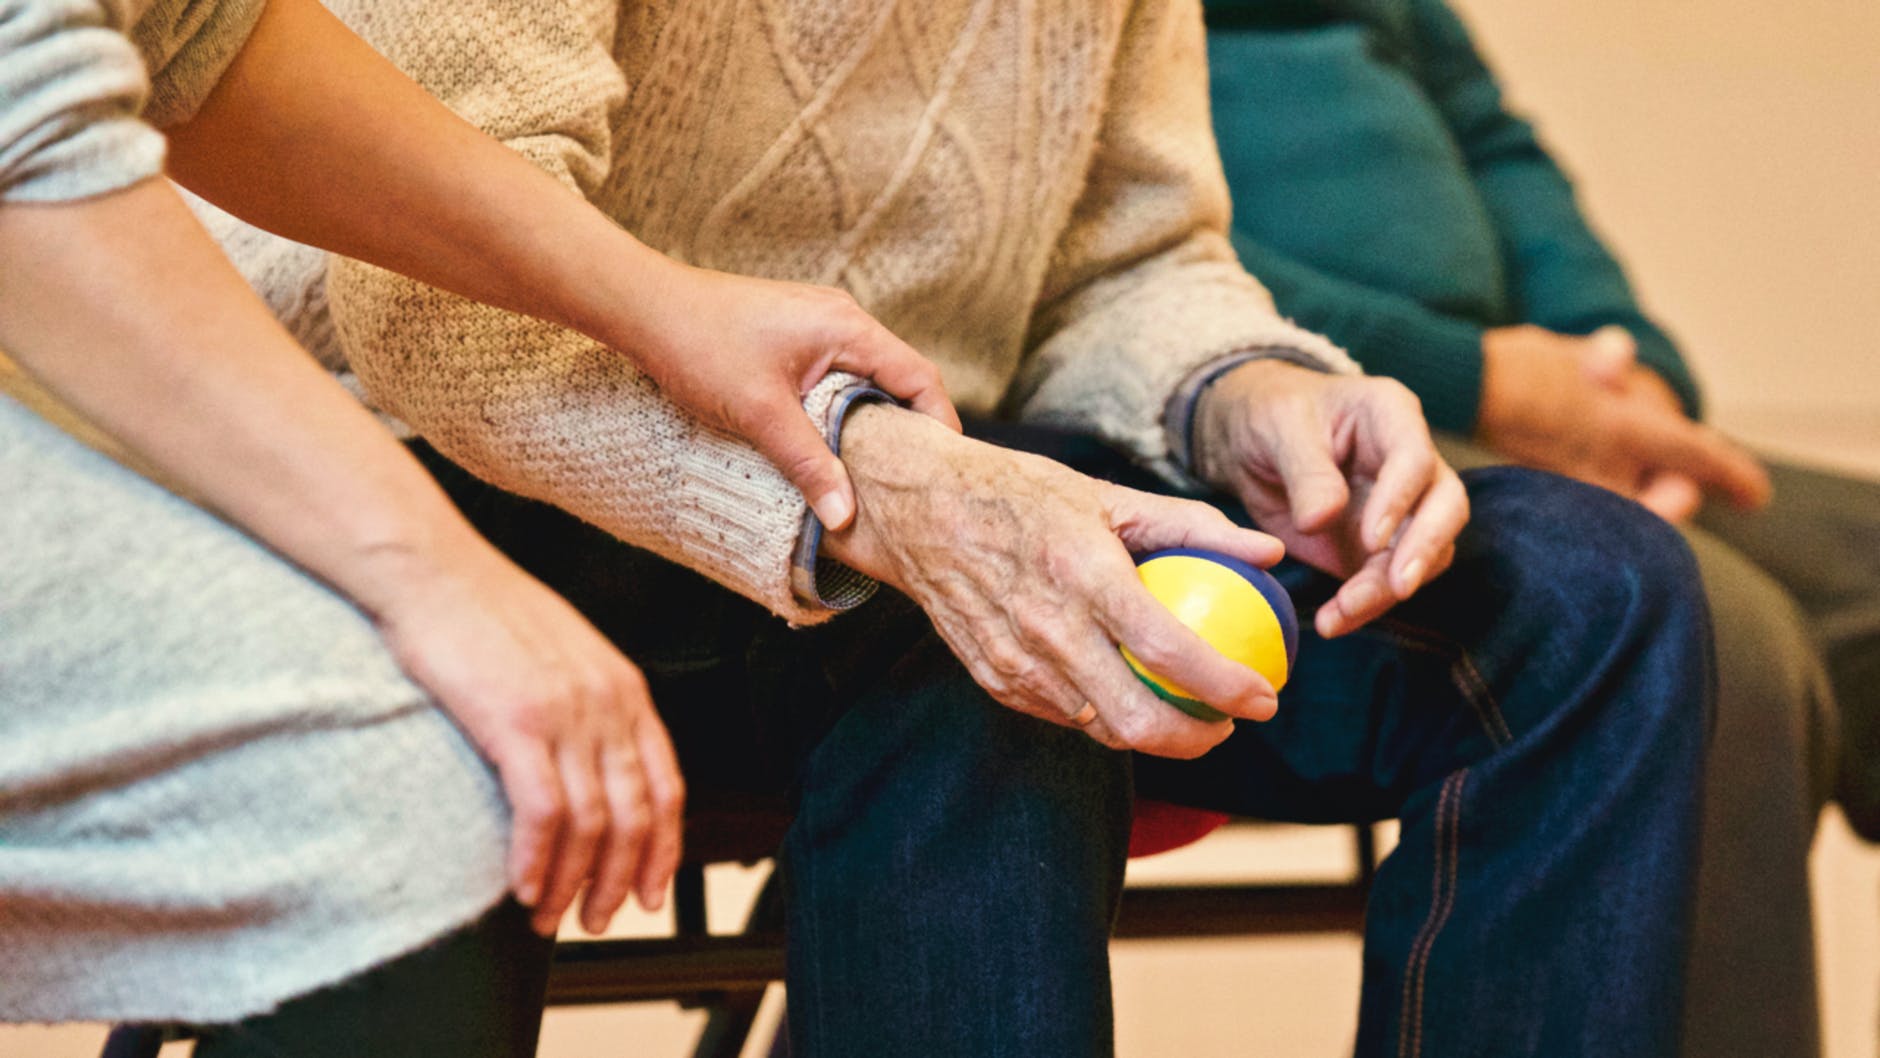 Close-up of the hands and arms of an older person and younger person sitting together